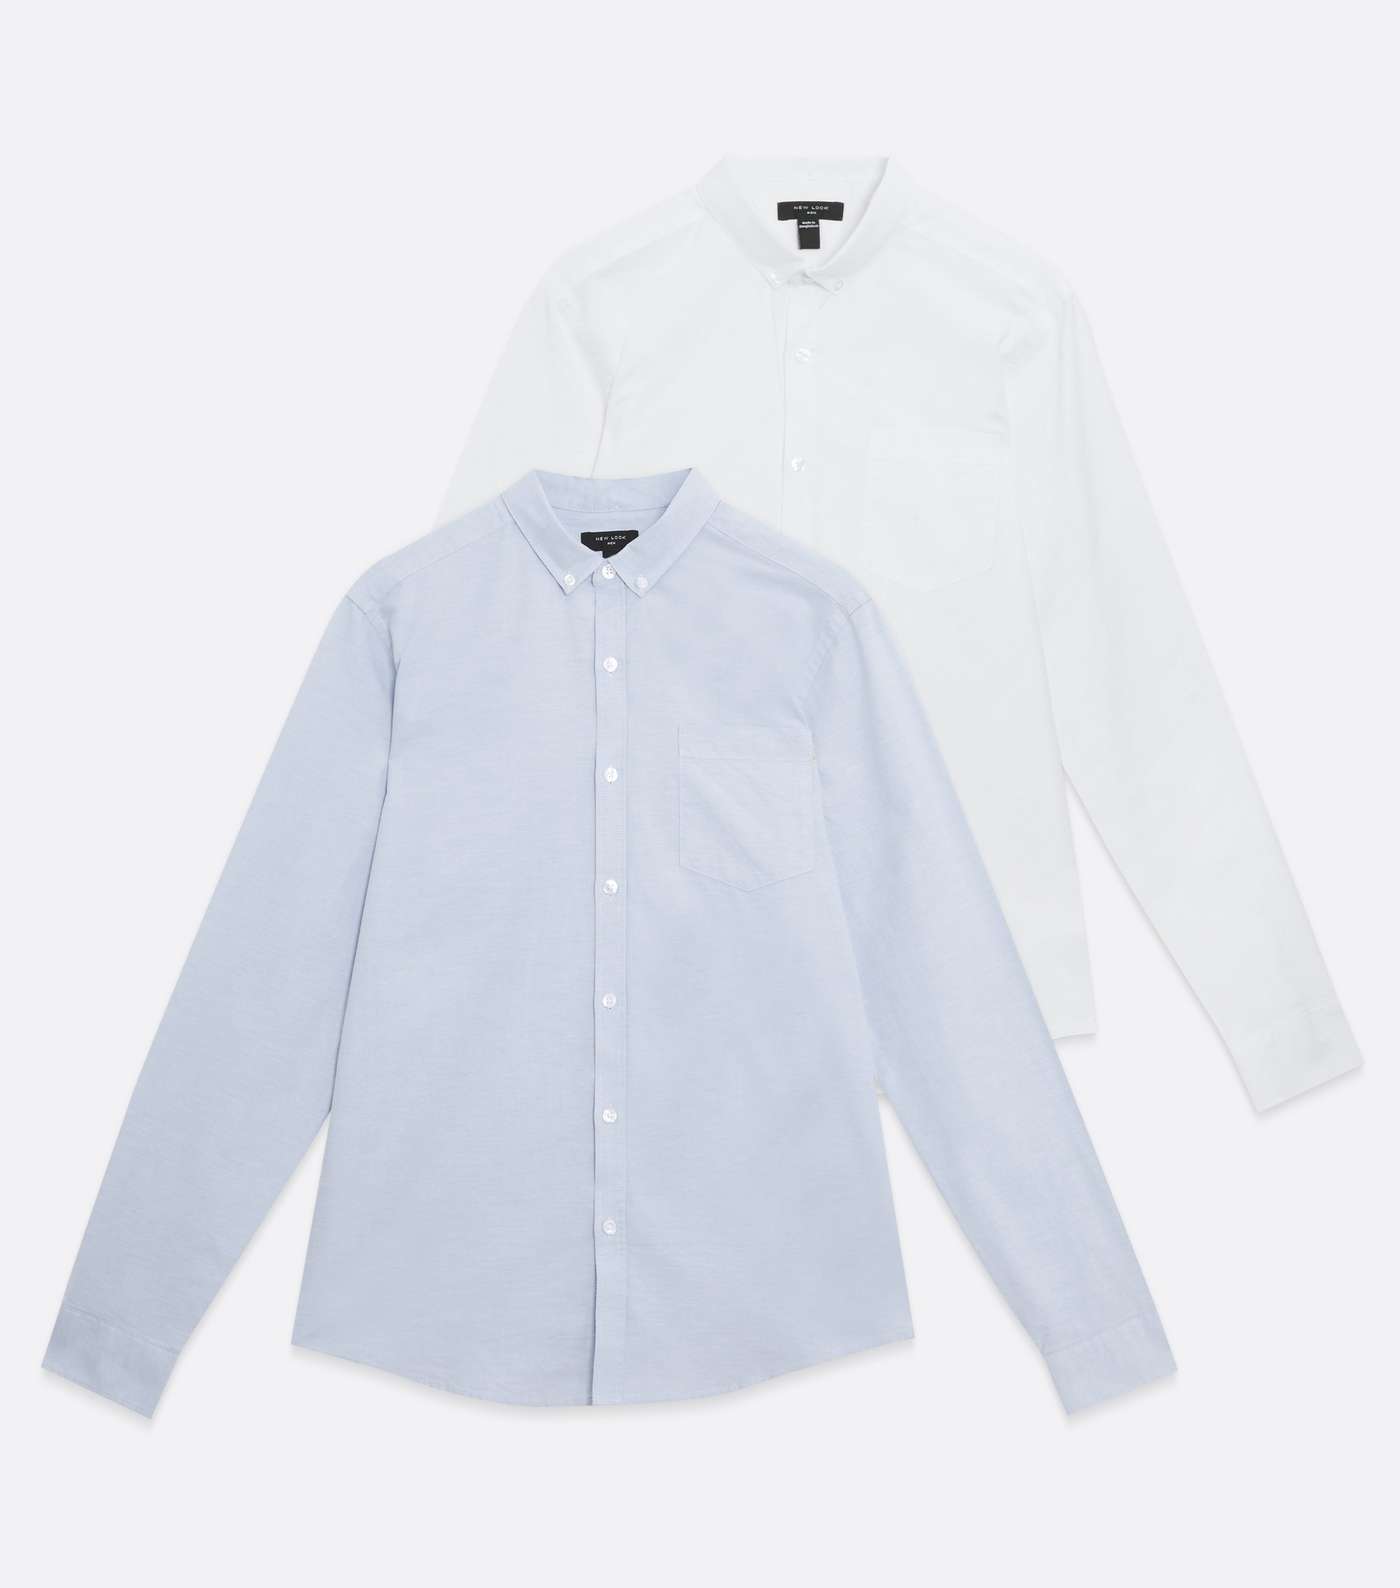 2 Pack Pale Blue and White Long Sleeve Oxford Shirts Image 5